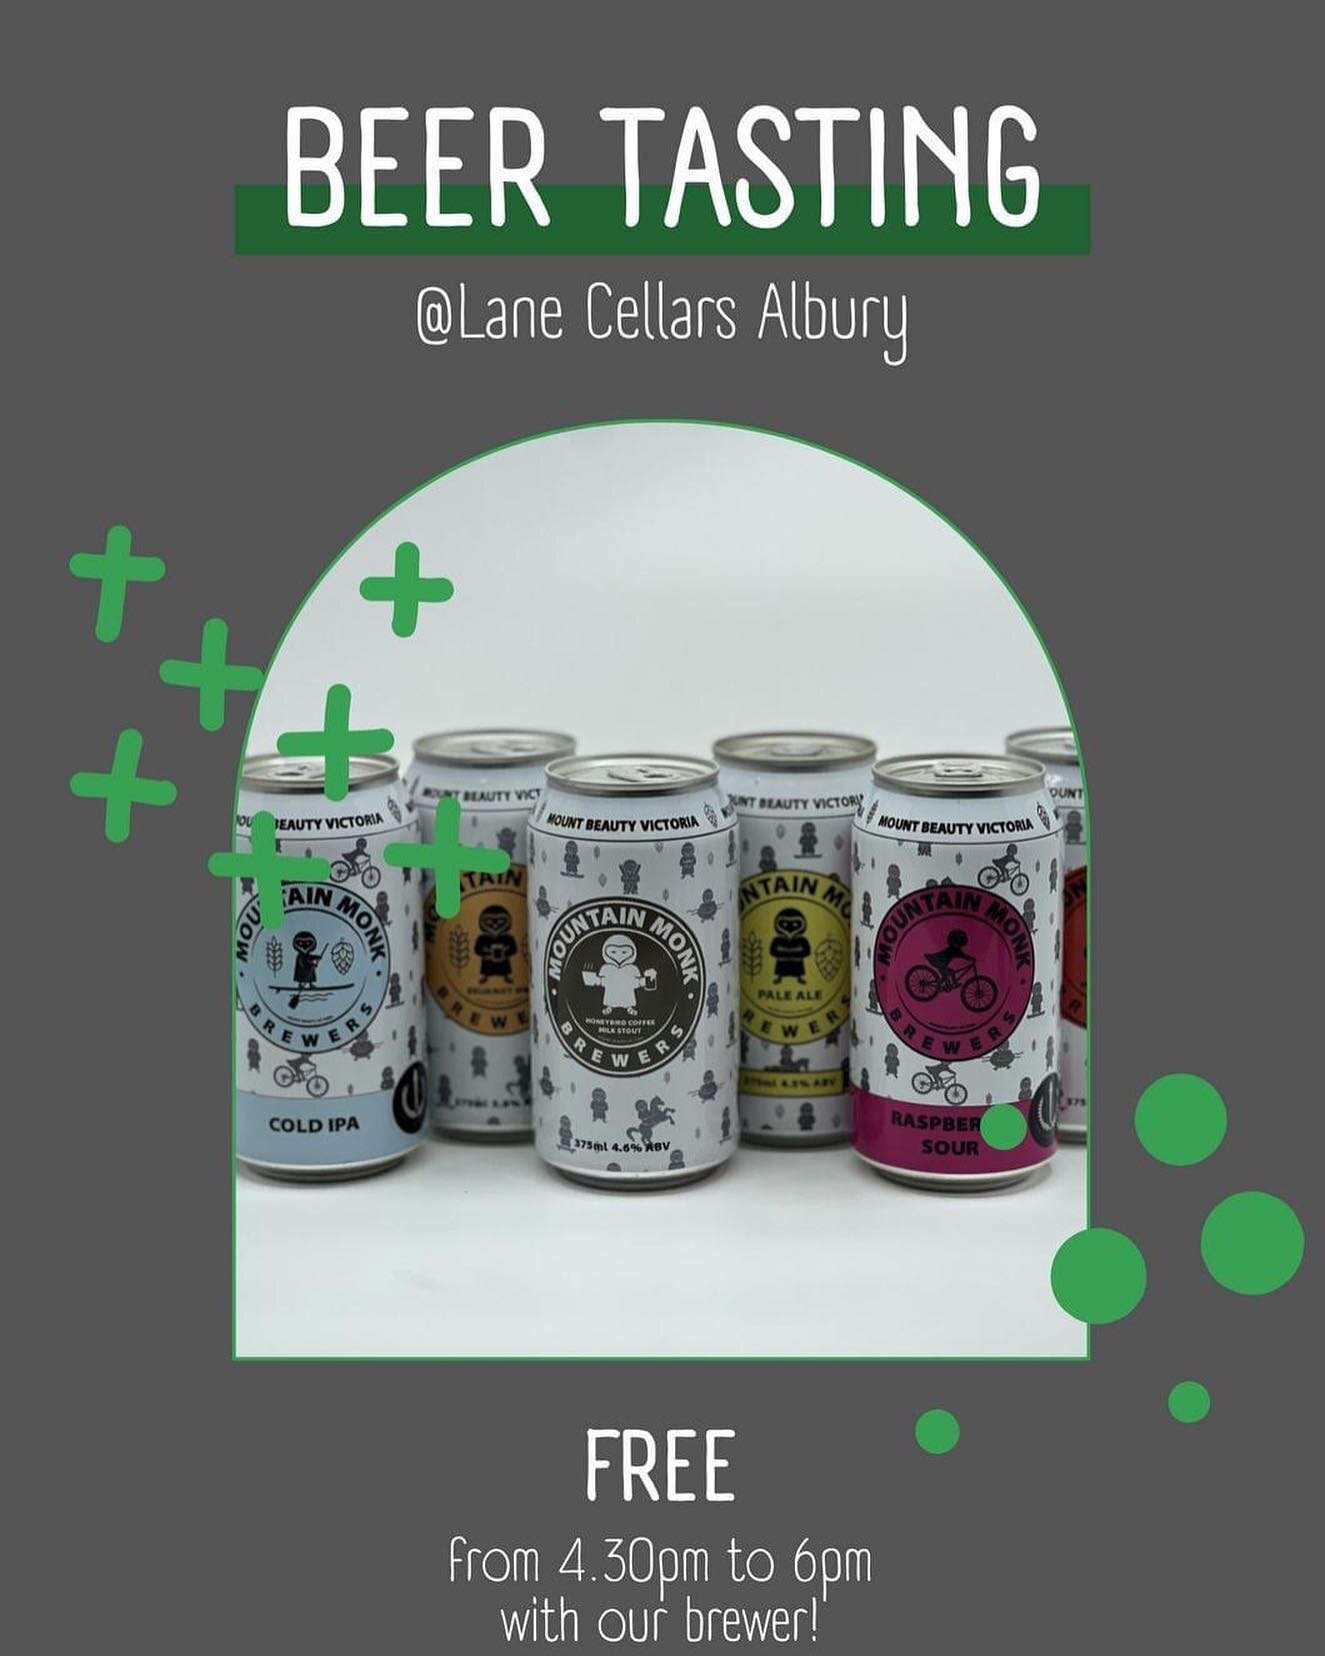 ALBURY LANE CELLARS - FROM 4.30PM TO 6.00PM
FRIDAY 9 FEBRUARY 2024

Are you in Albury/Wodonga and want to try out some local craft beer? We&rsquo;ve got you covered!

Mountain Monk Brewers is heading to Albury for a free tasting at Lane Cellars. Meet